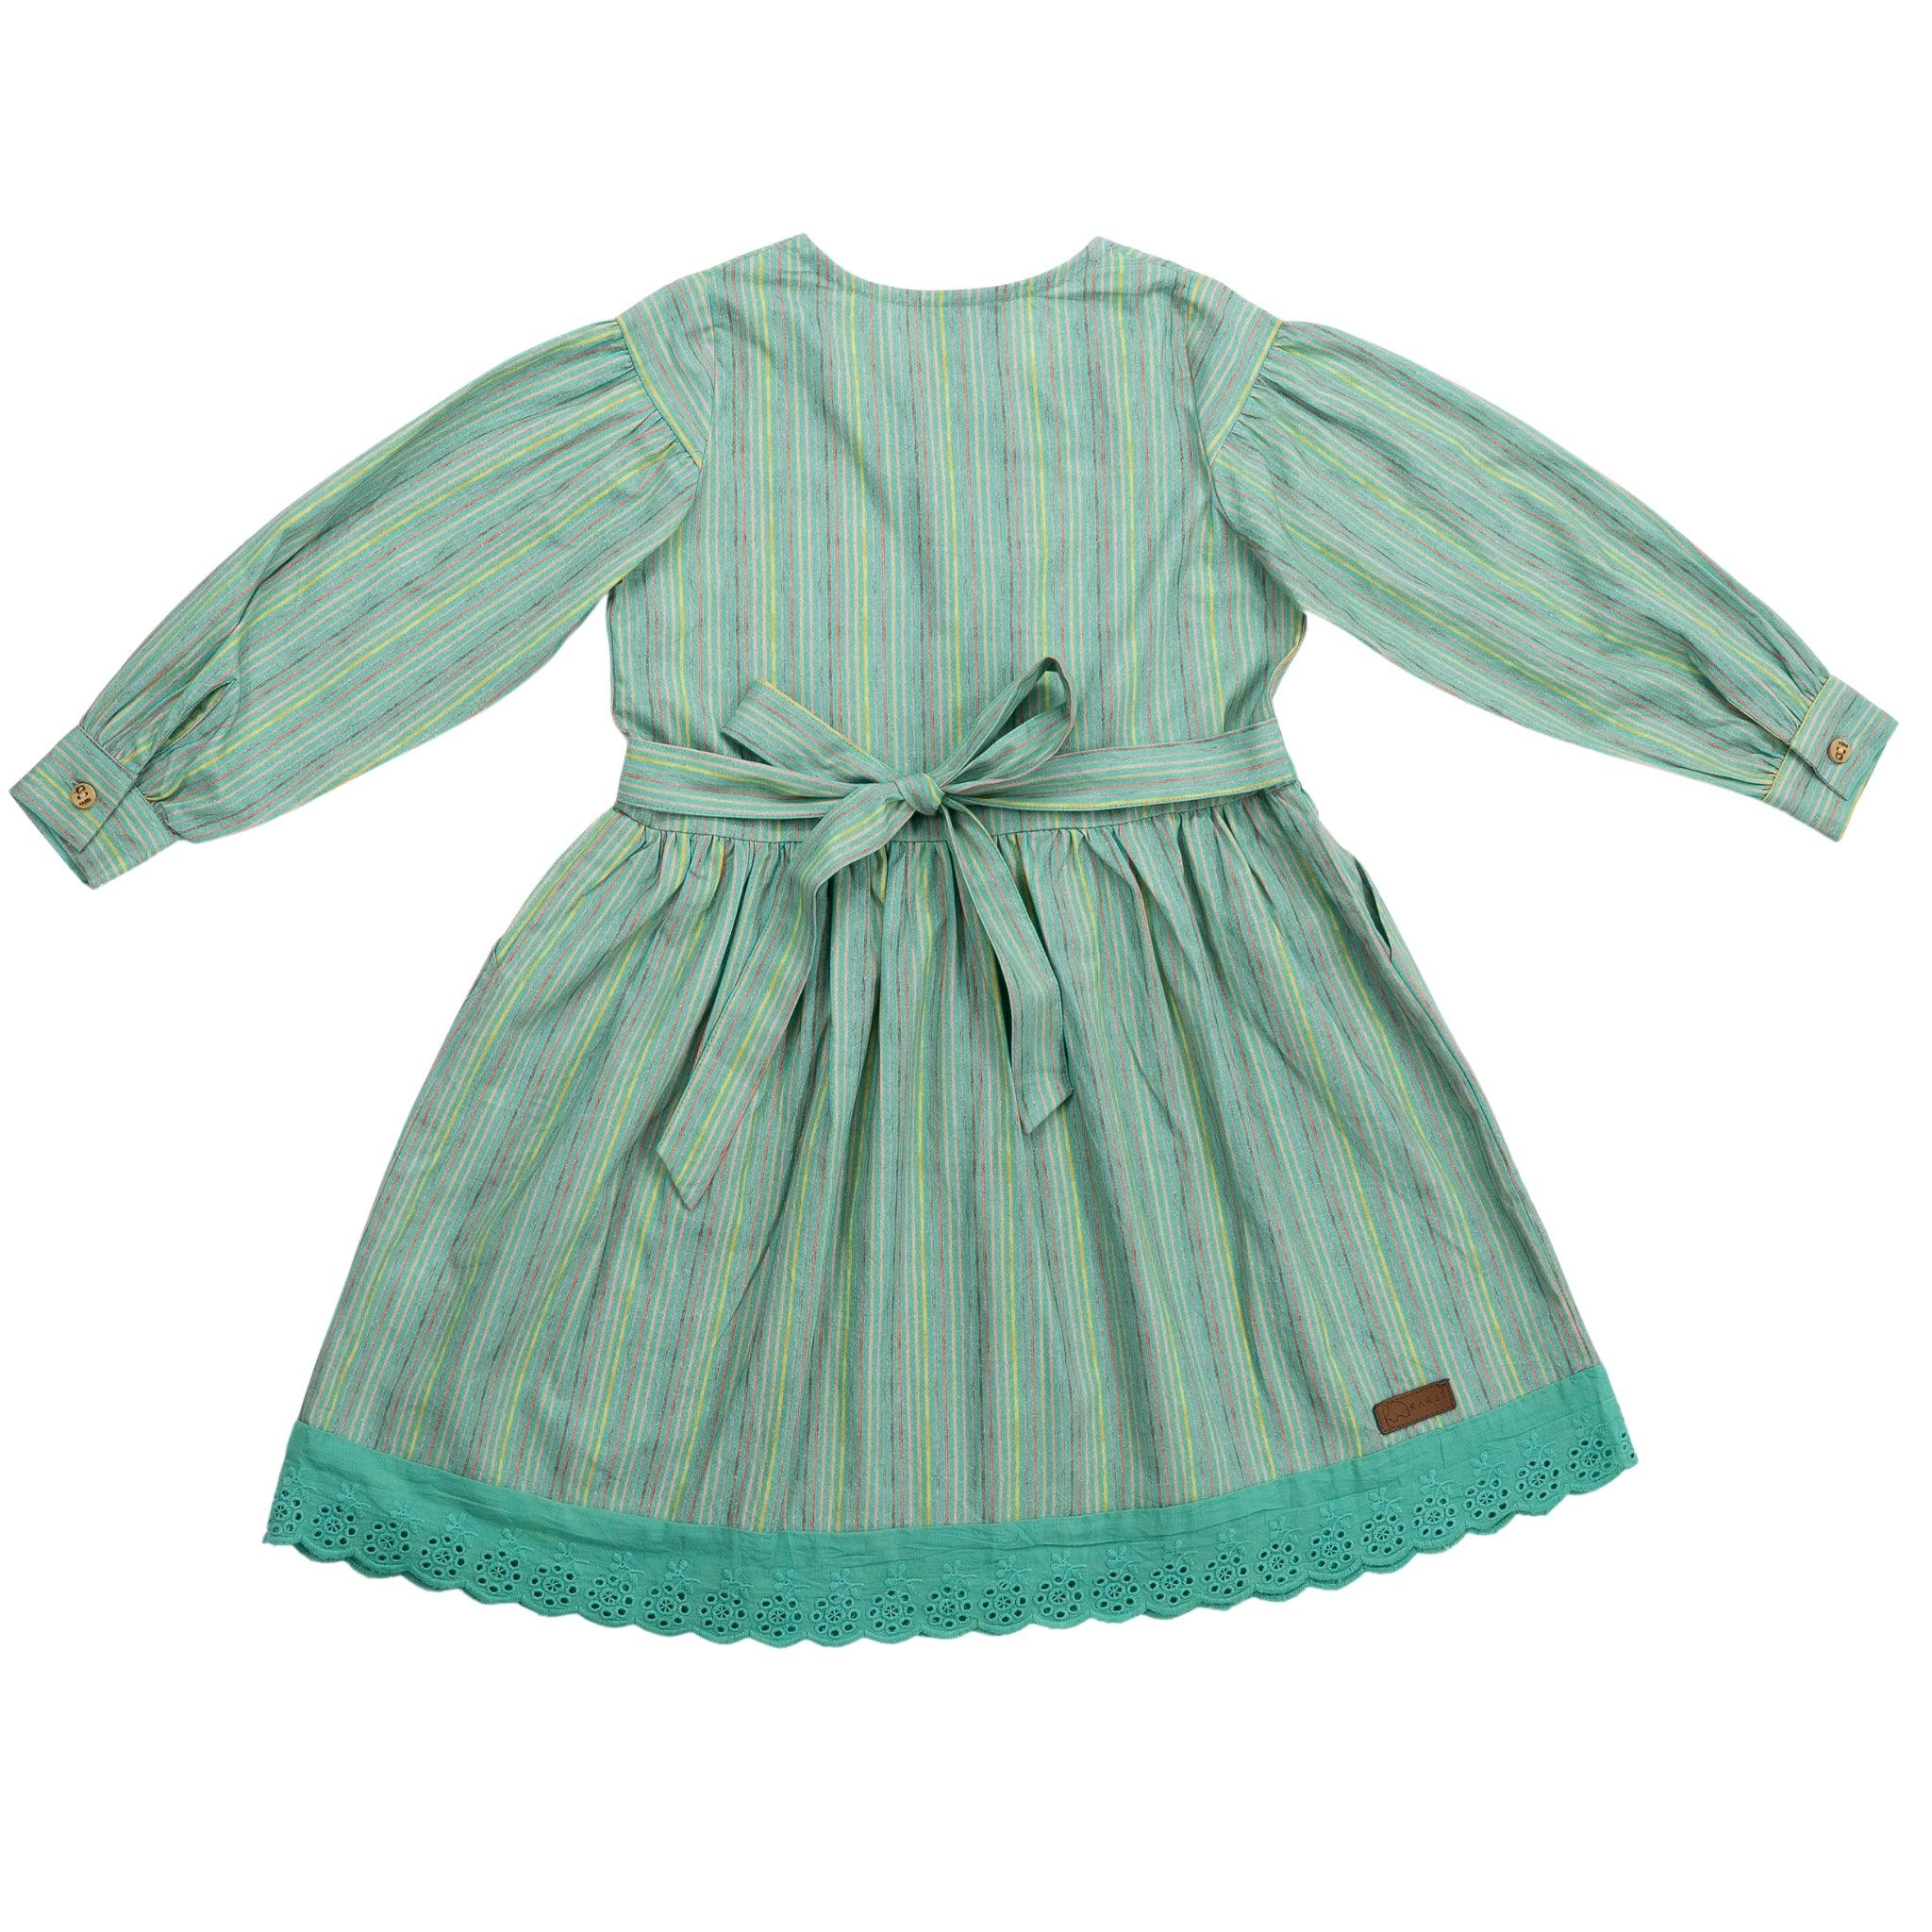 A Karee green striped toddler dress with long puff sleeves and a teal crochet trim, featuring a belt at the waist, displayed on a white background.